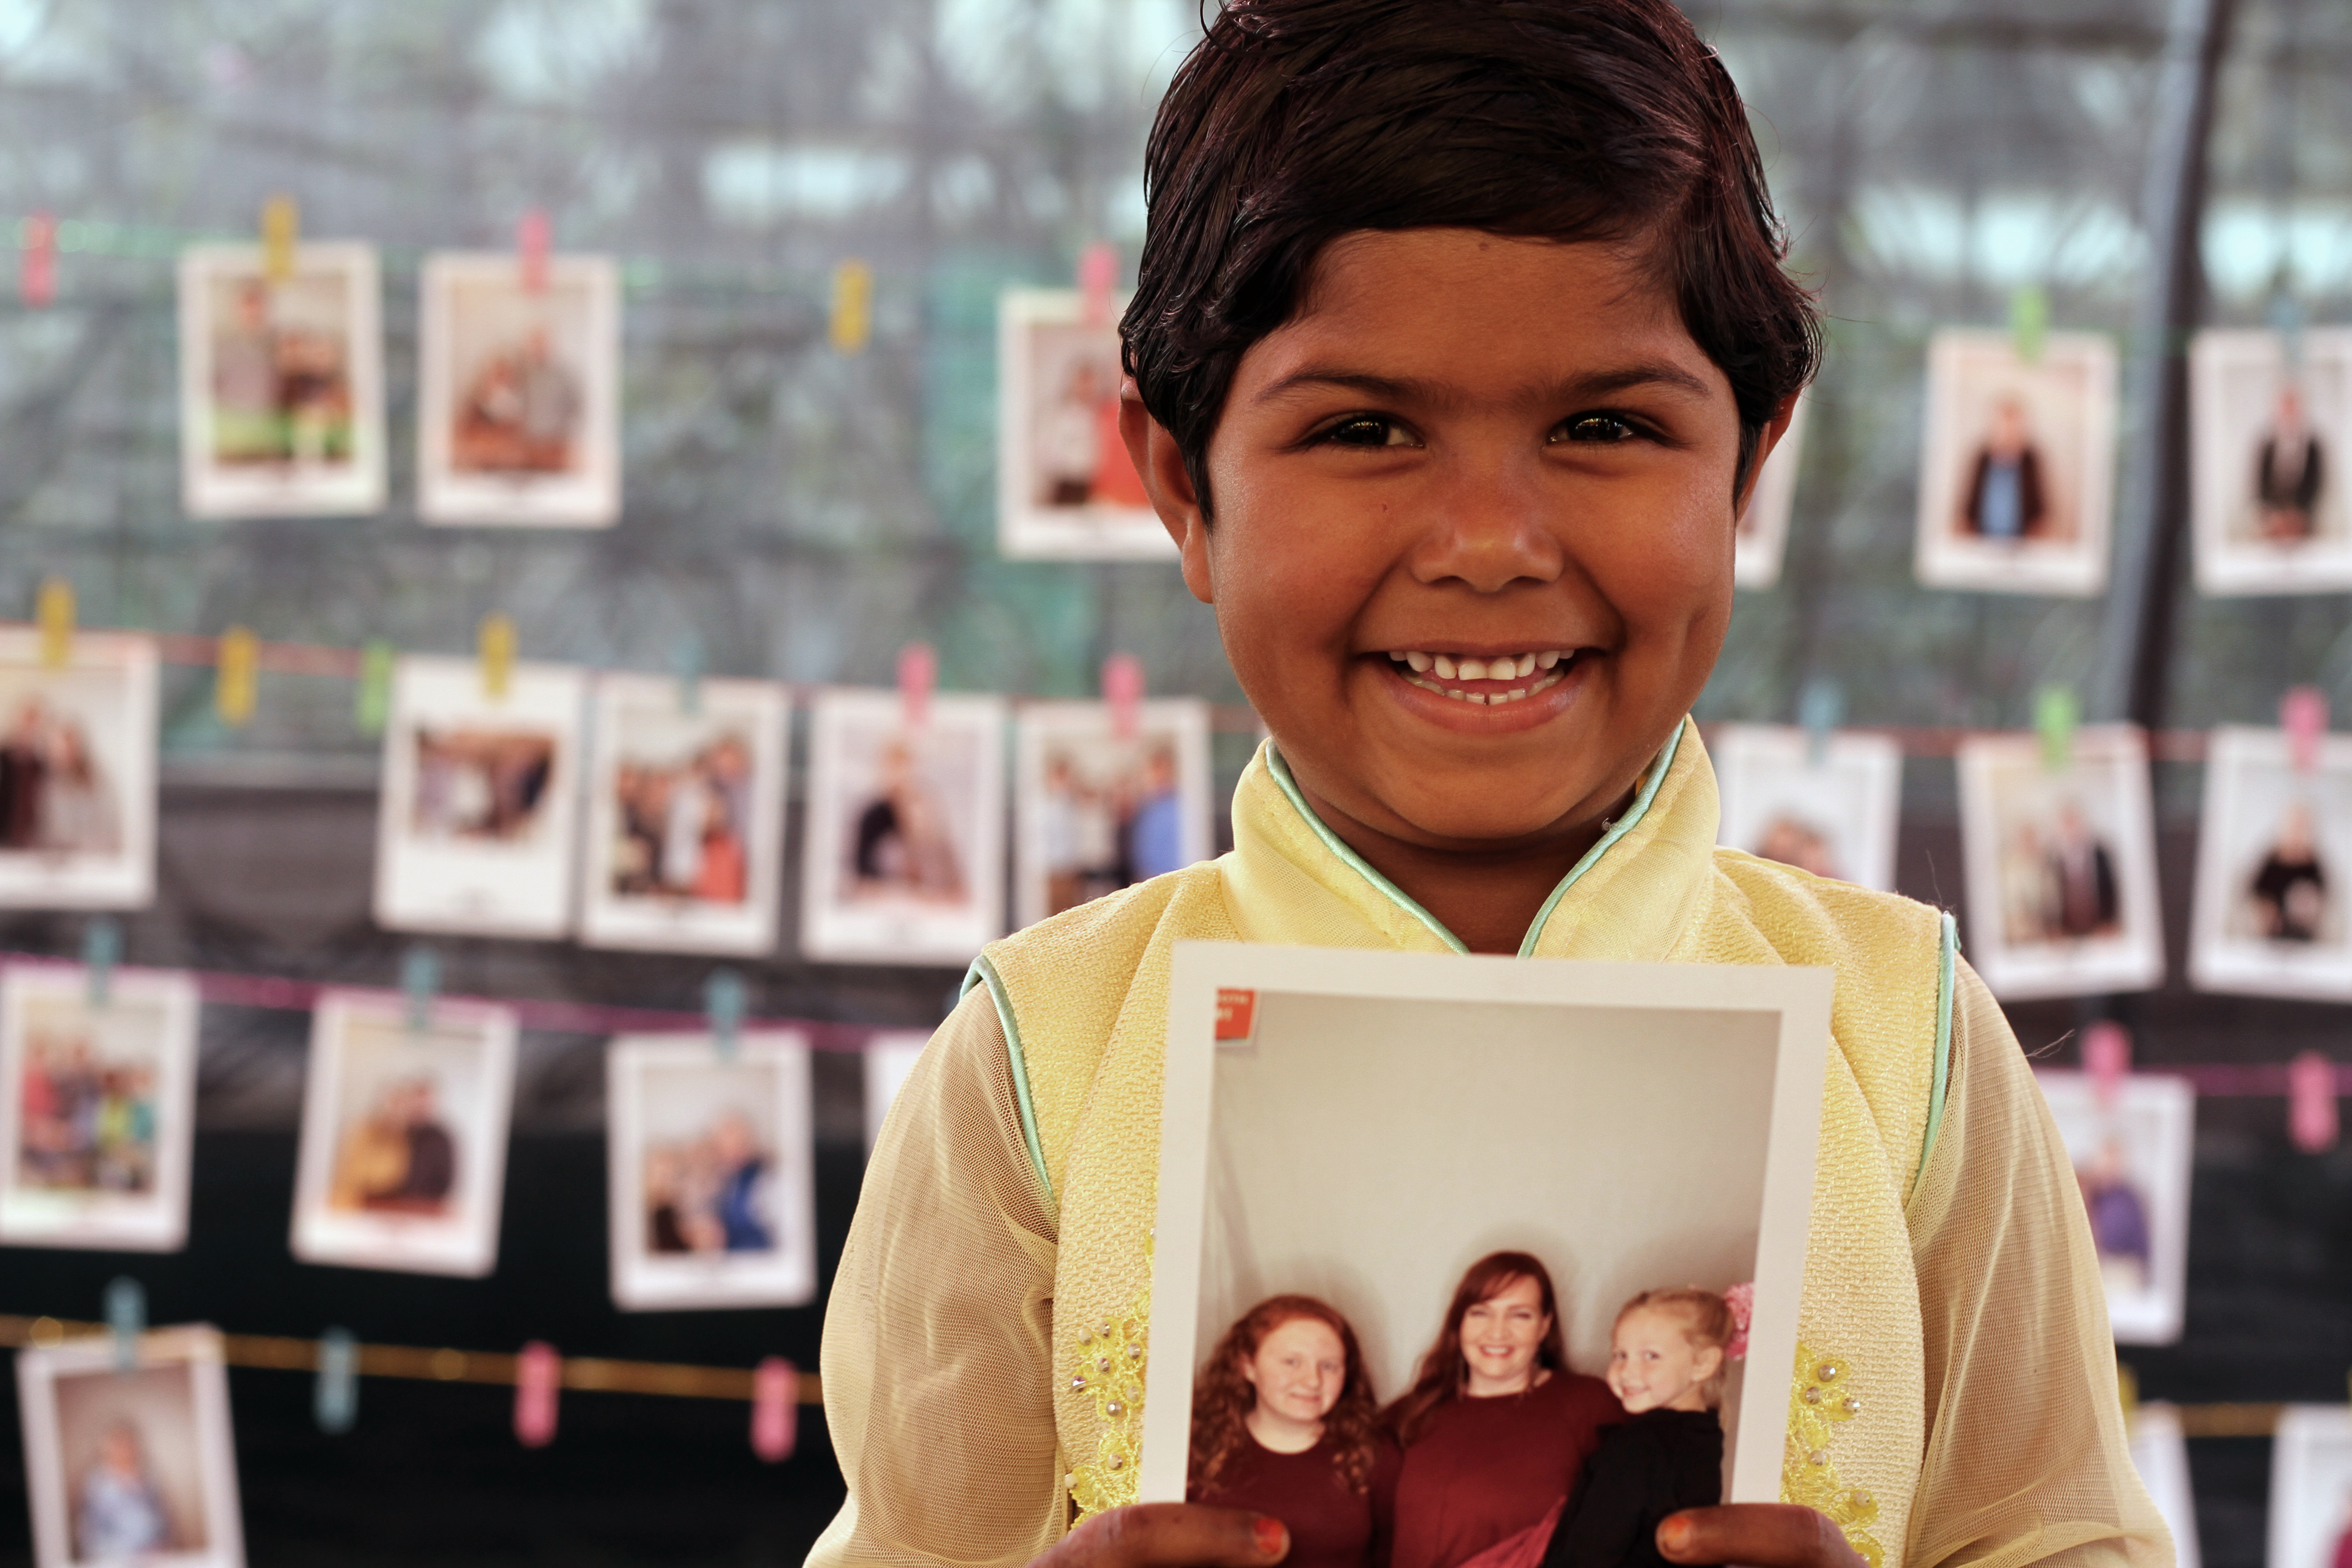 A young girl in Bangladesh beams as she hold the photo of her new child sponsors.